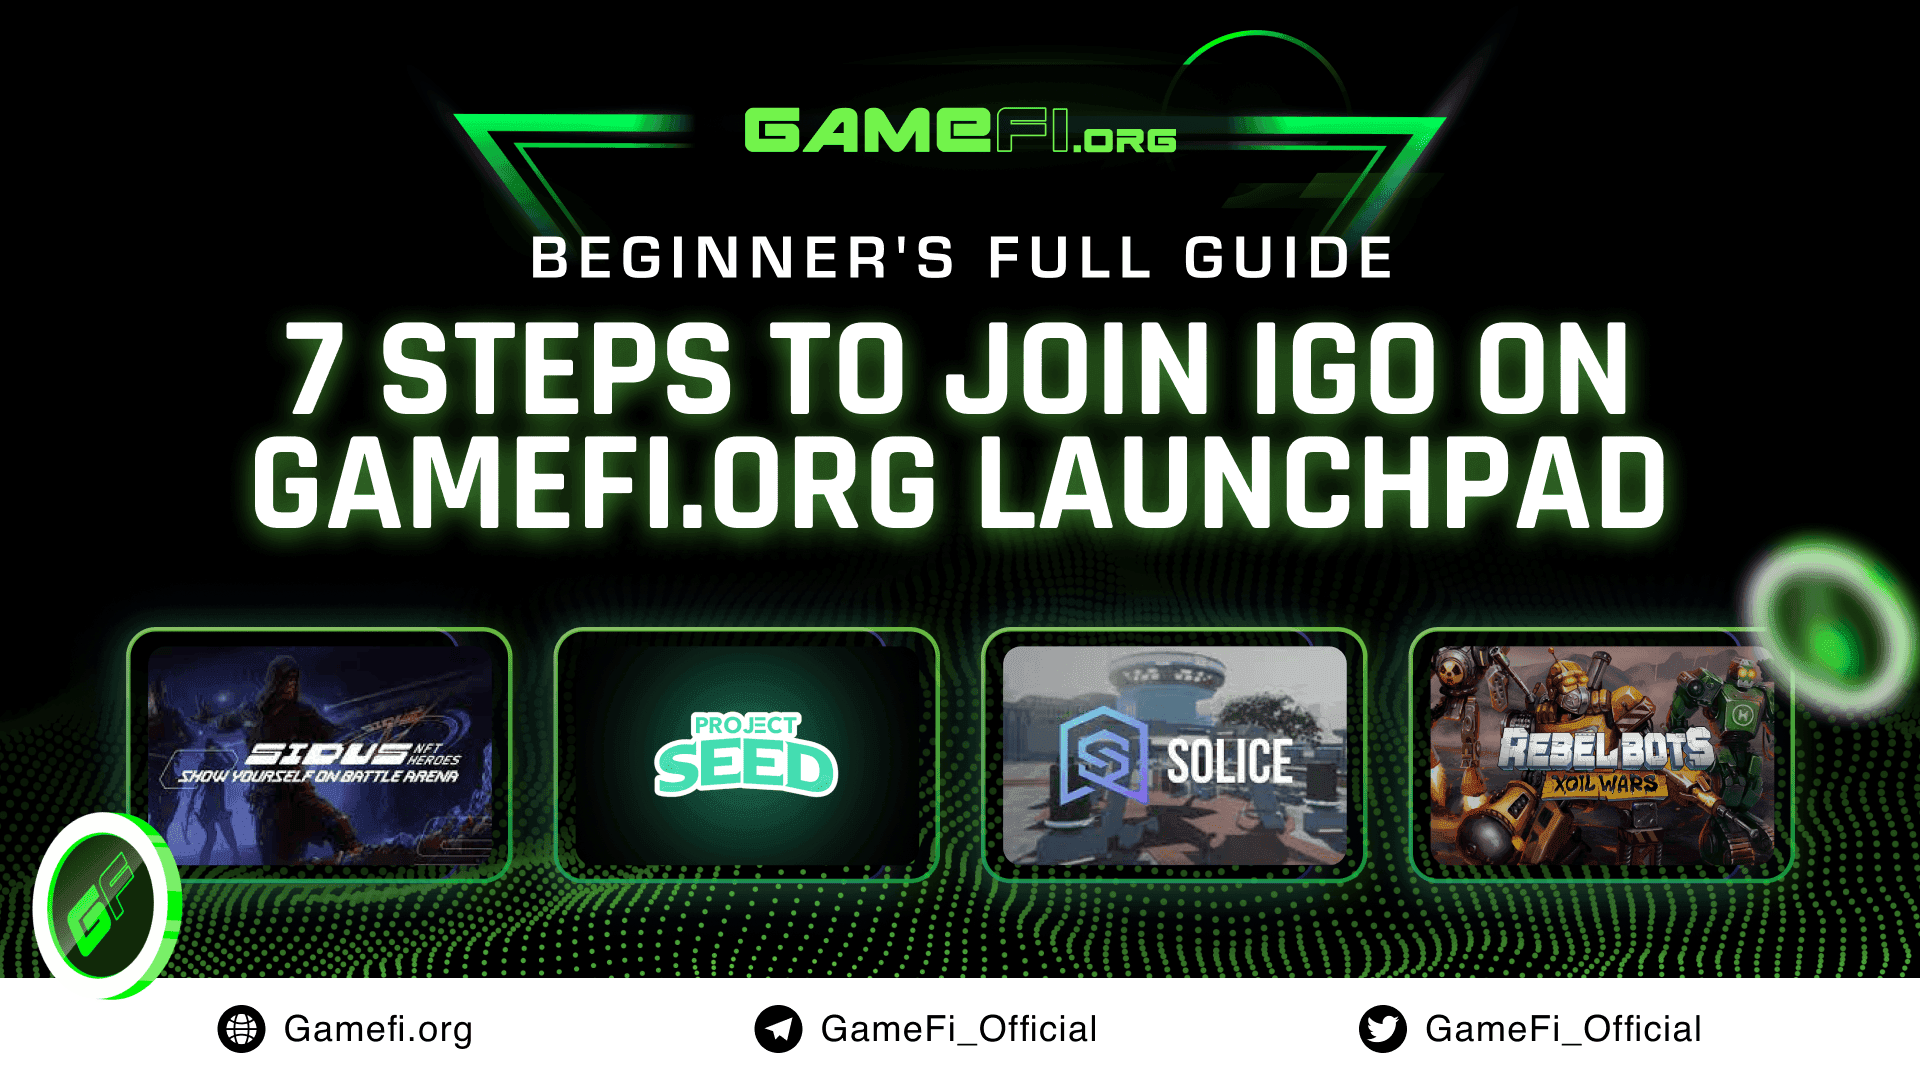 COMPLETE GUIDELINE: 7 STEPS TO JOIN THE INITIAL GAMING OFFERING (IGO) ON GAMEFI LAUNCHPAD